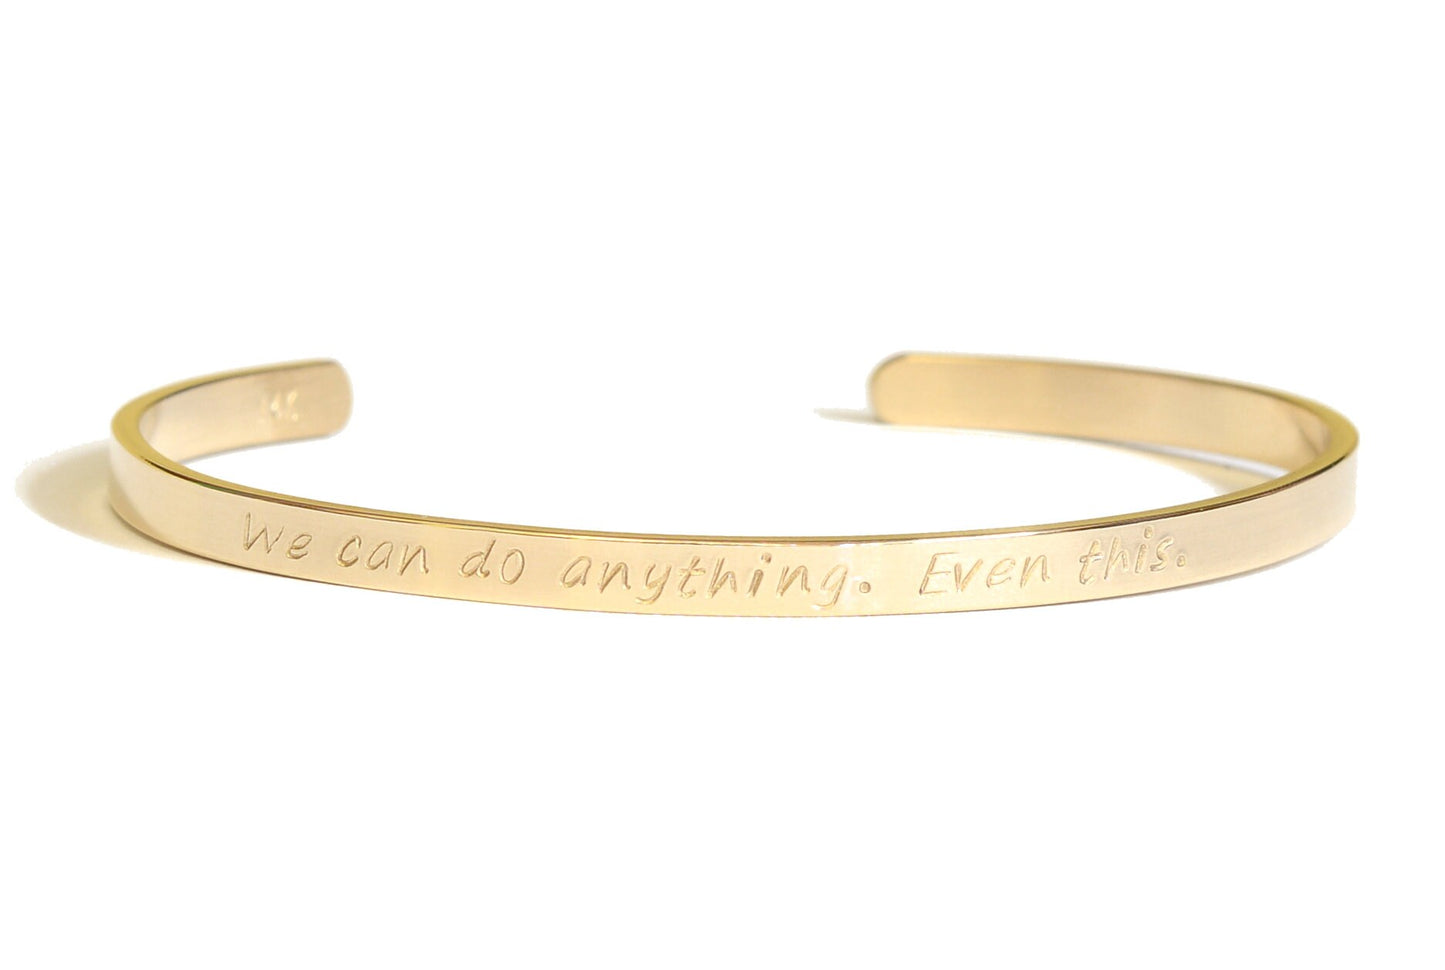 We can do anything even this 14k solid Gold Cuff Bracelet